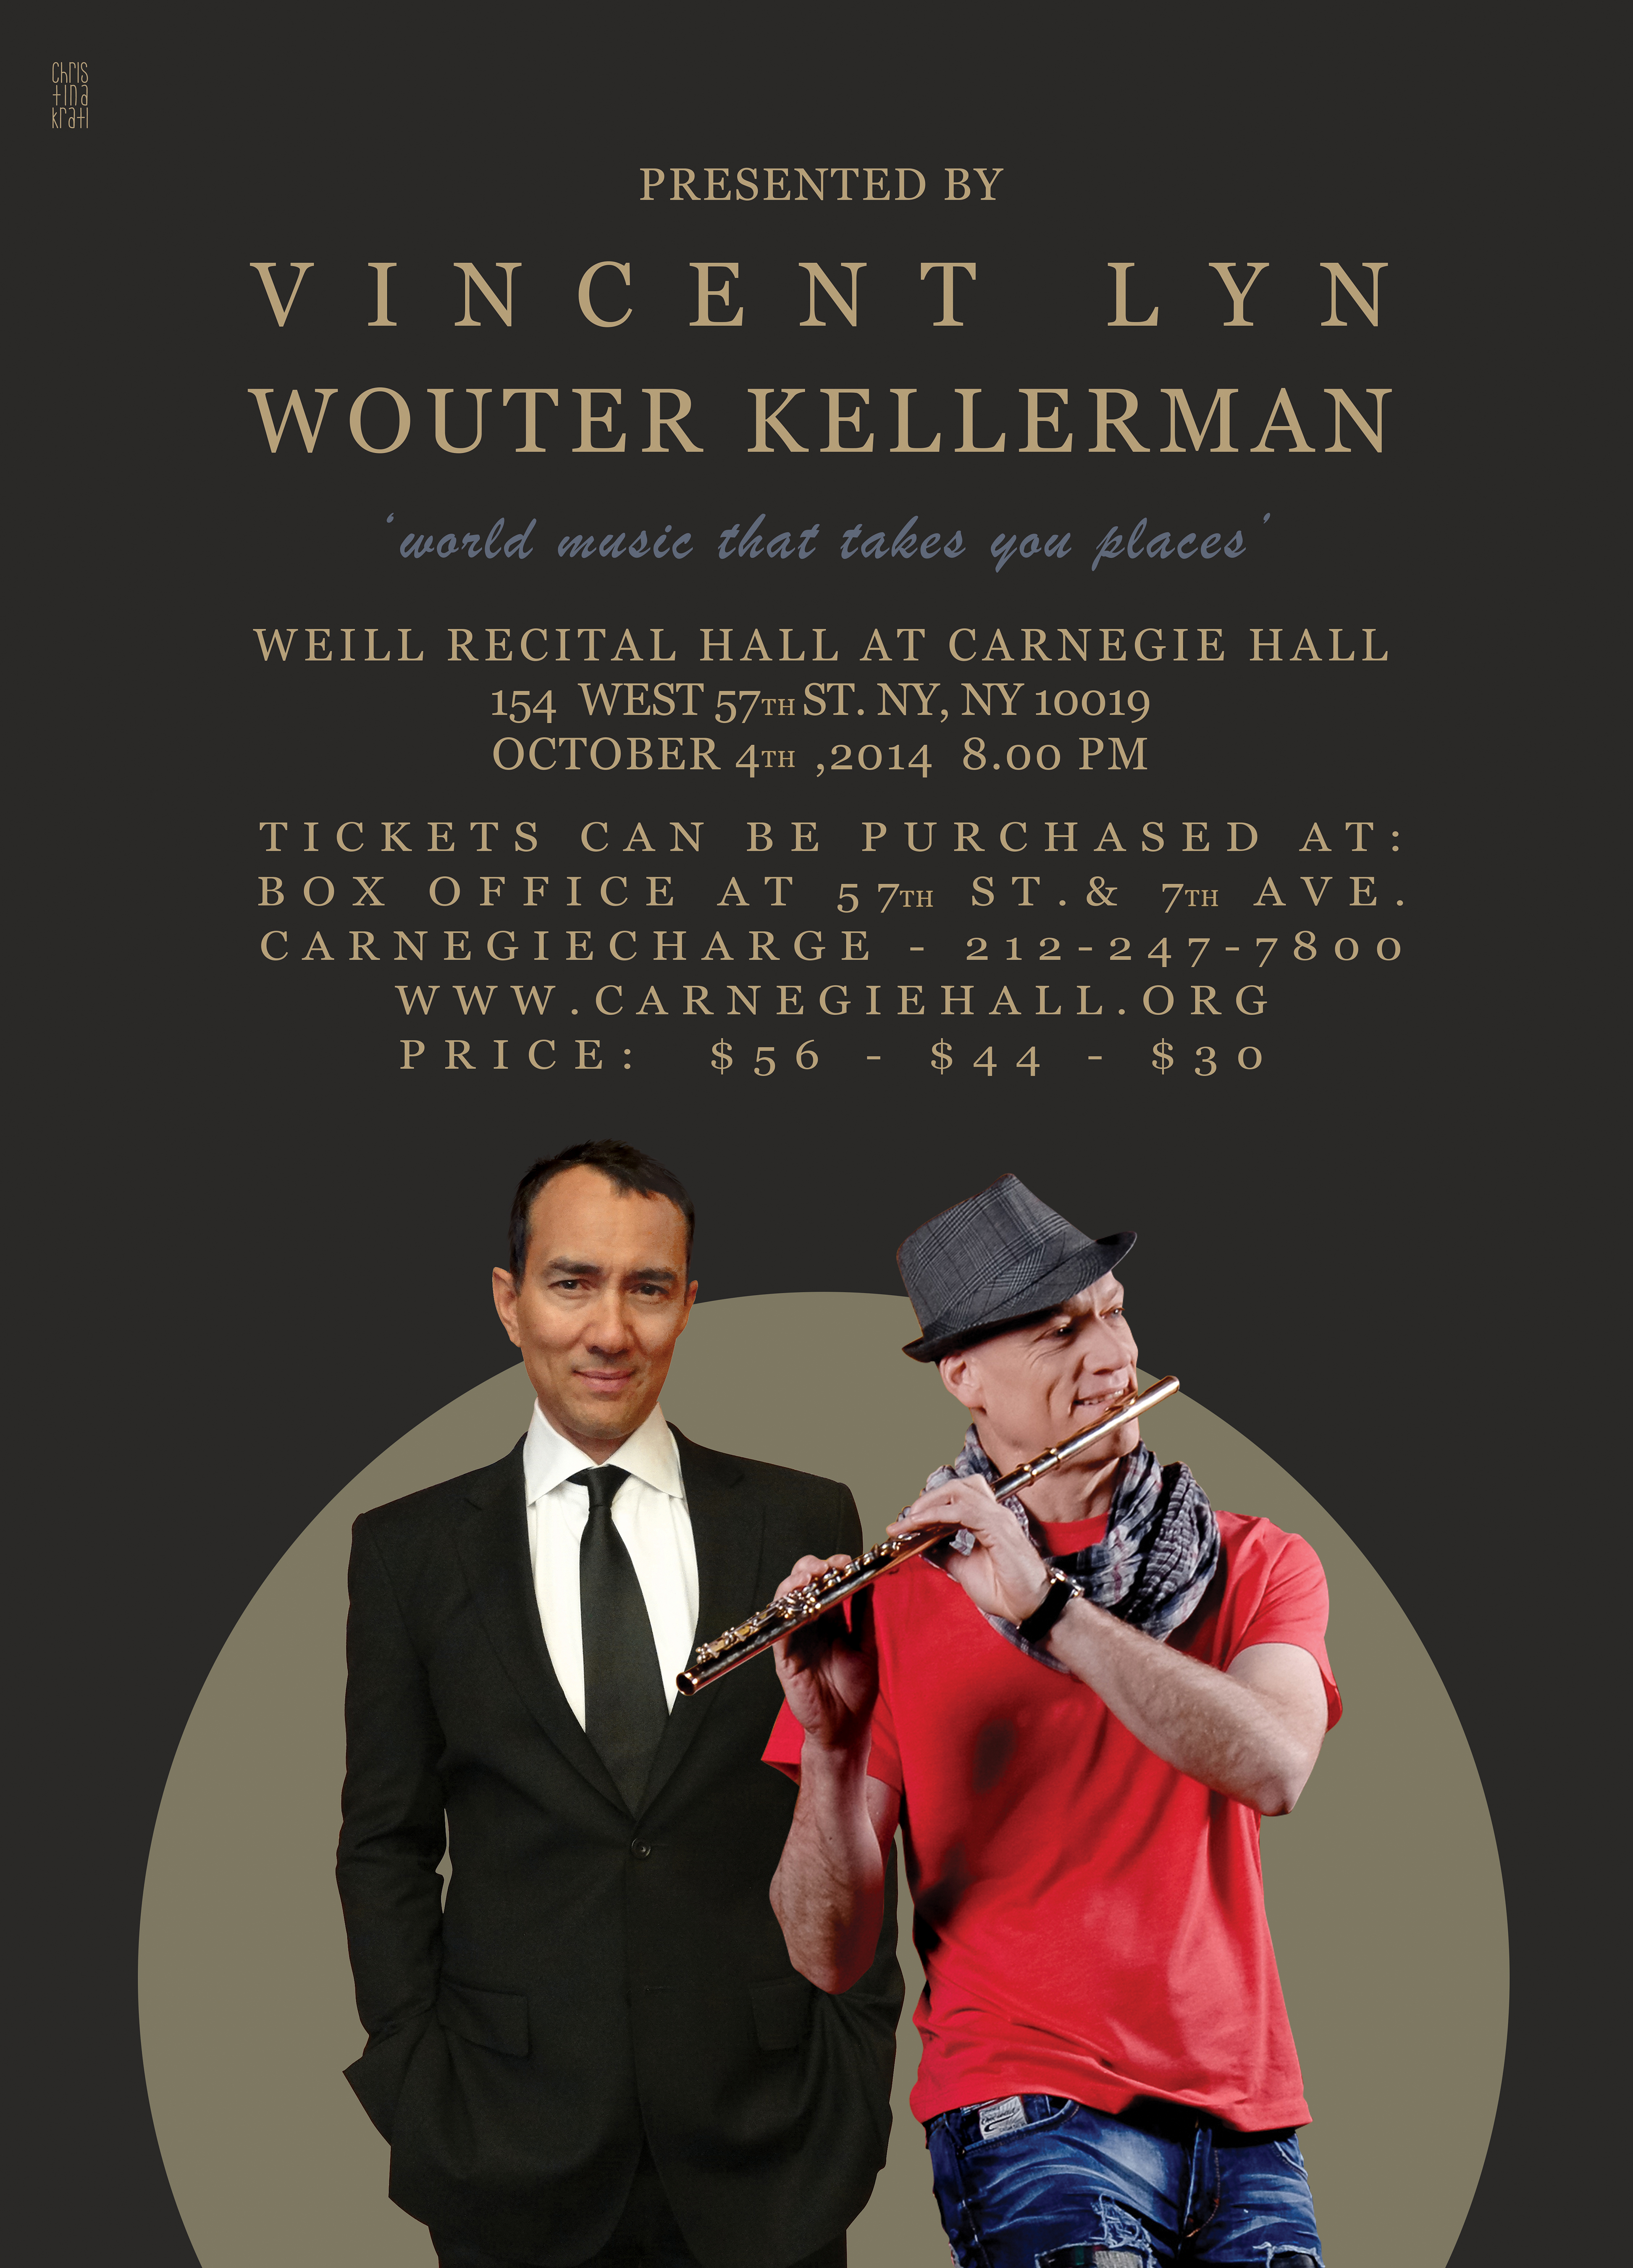 Vincent Lyn & Wouter Kellerman Carnegie Hall Concert. October 4th, 2014. Sold out performance!